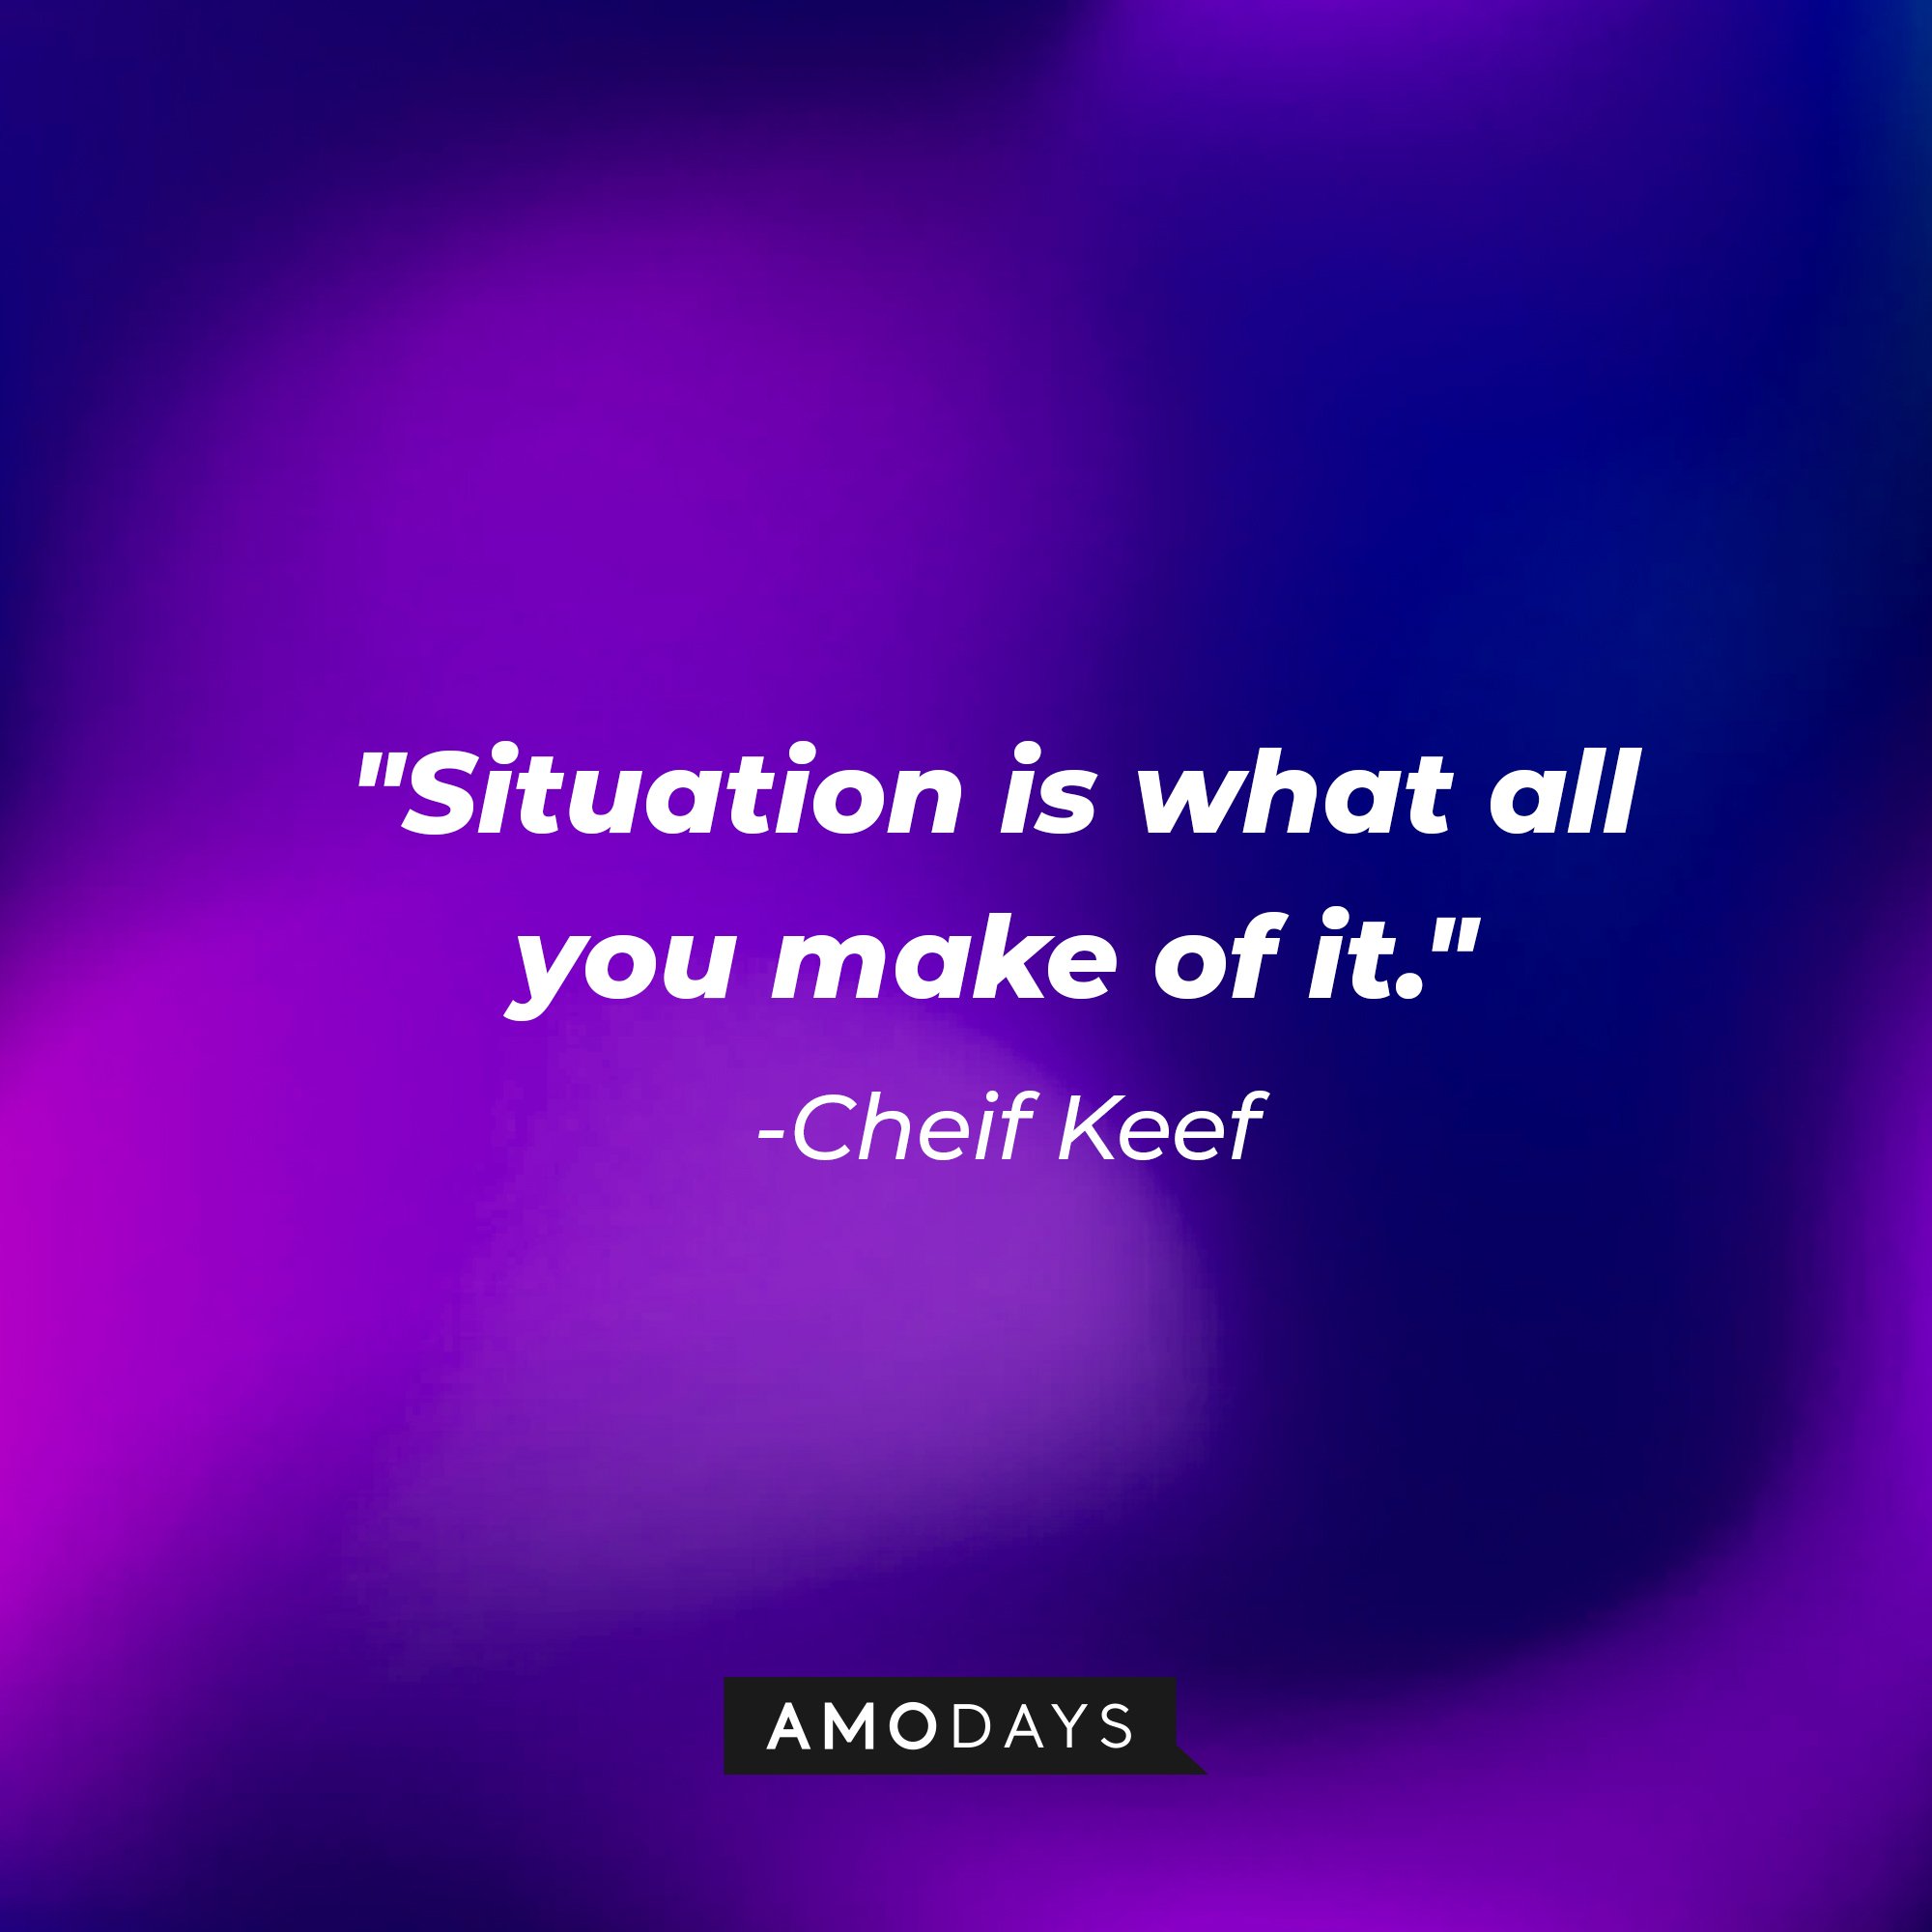 Chief Keef’s quote: "Situation is what all you make of it." | Image: AmoDays 